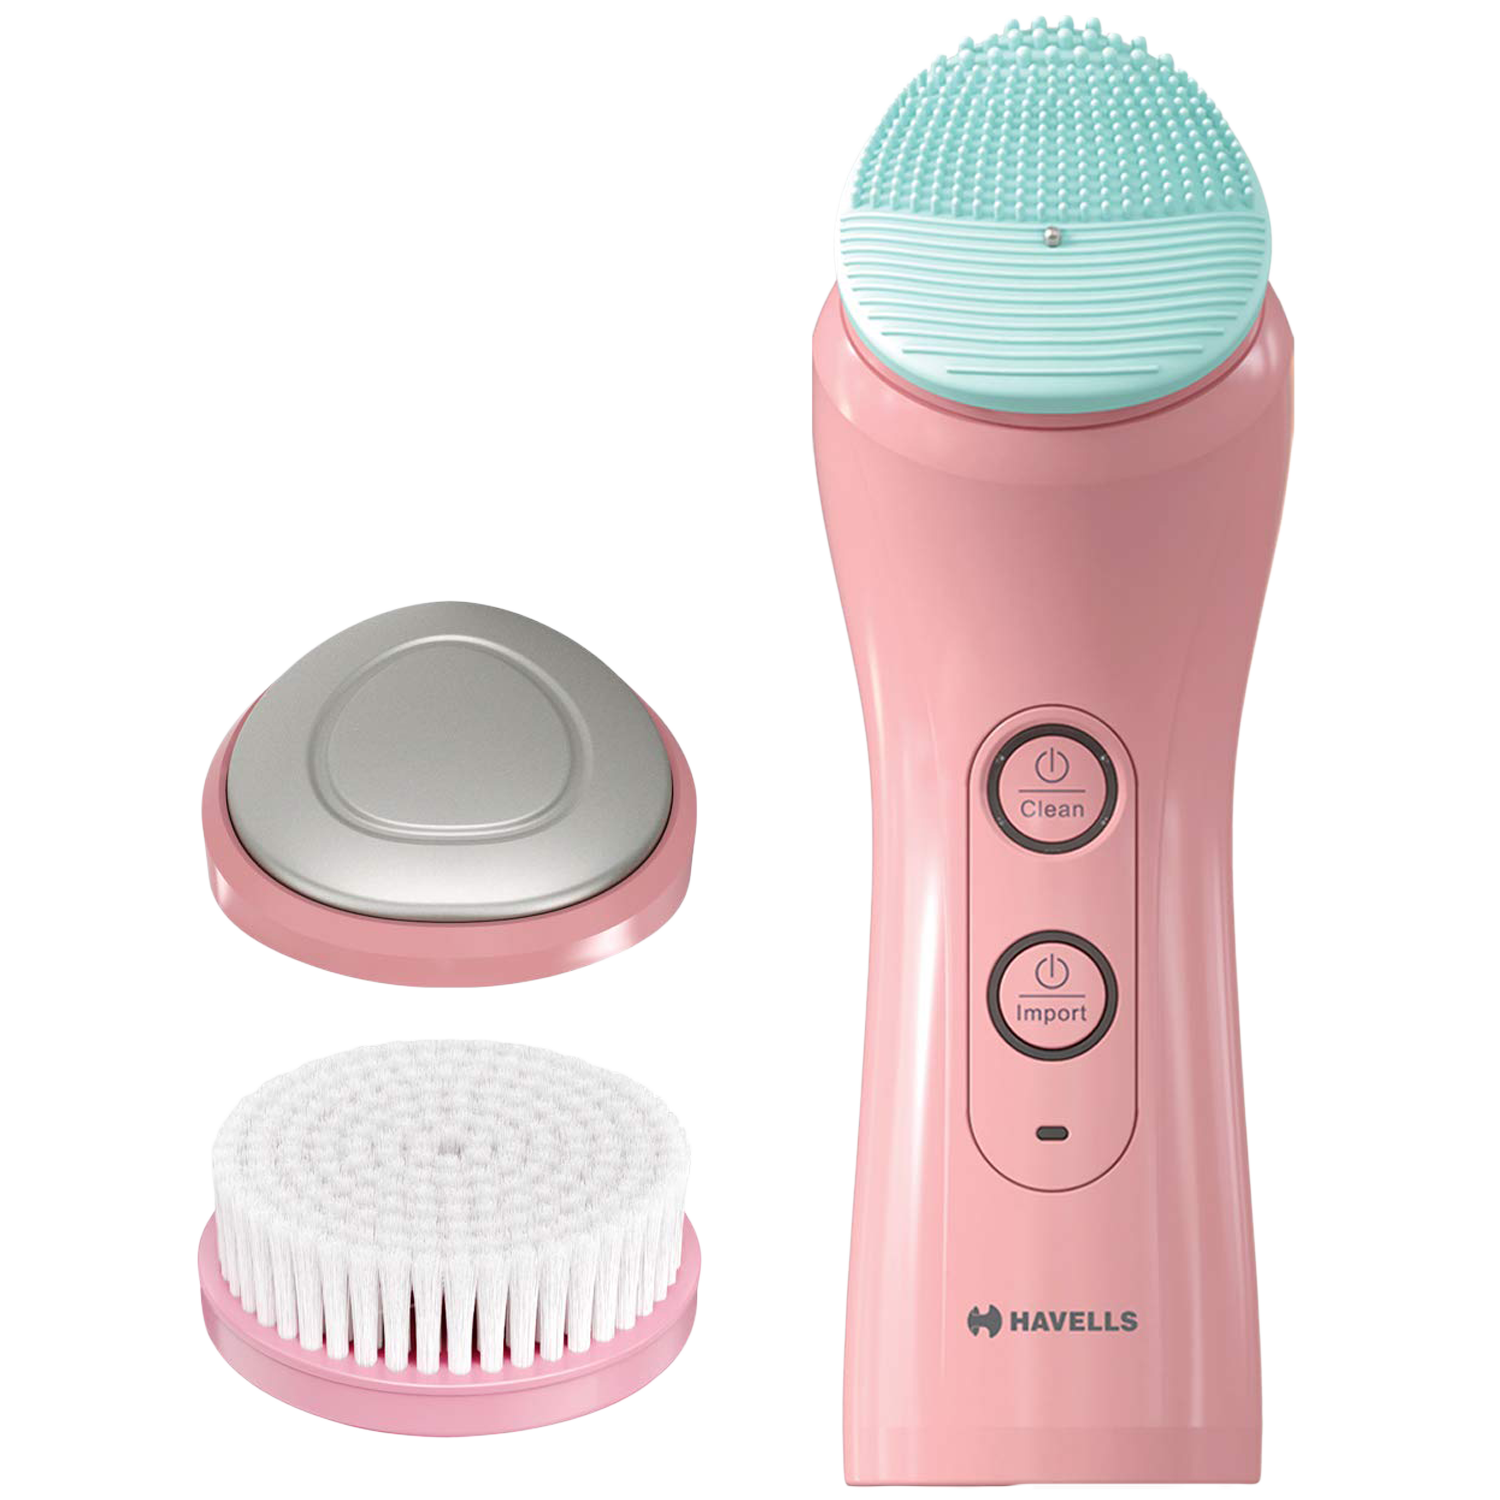 Havells Skin Care Cordless 2-in-1 Facial Cleanser (6 Operation Modes, SC5070, Pink)